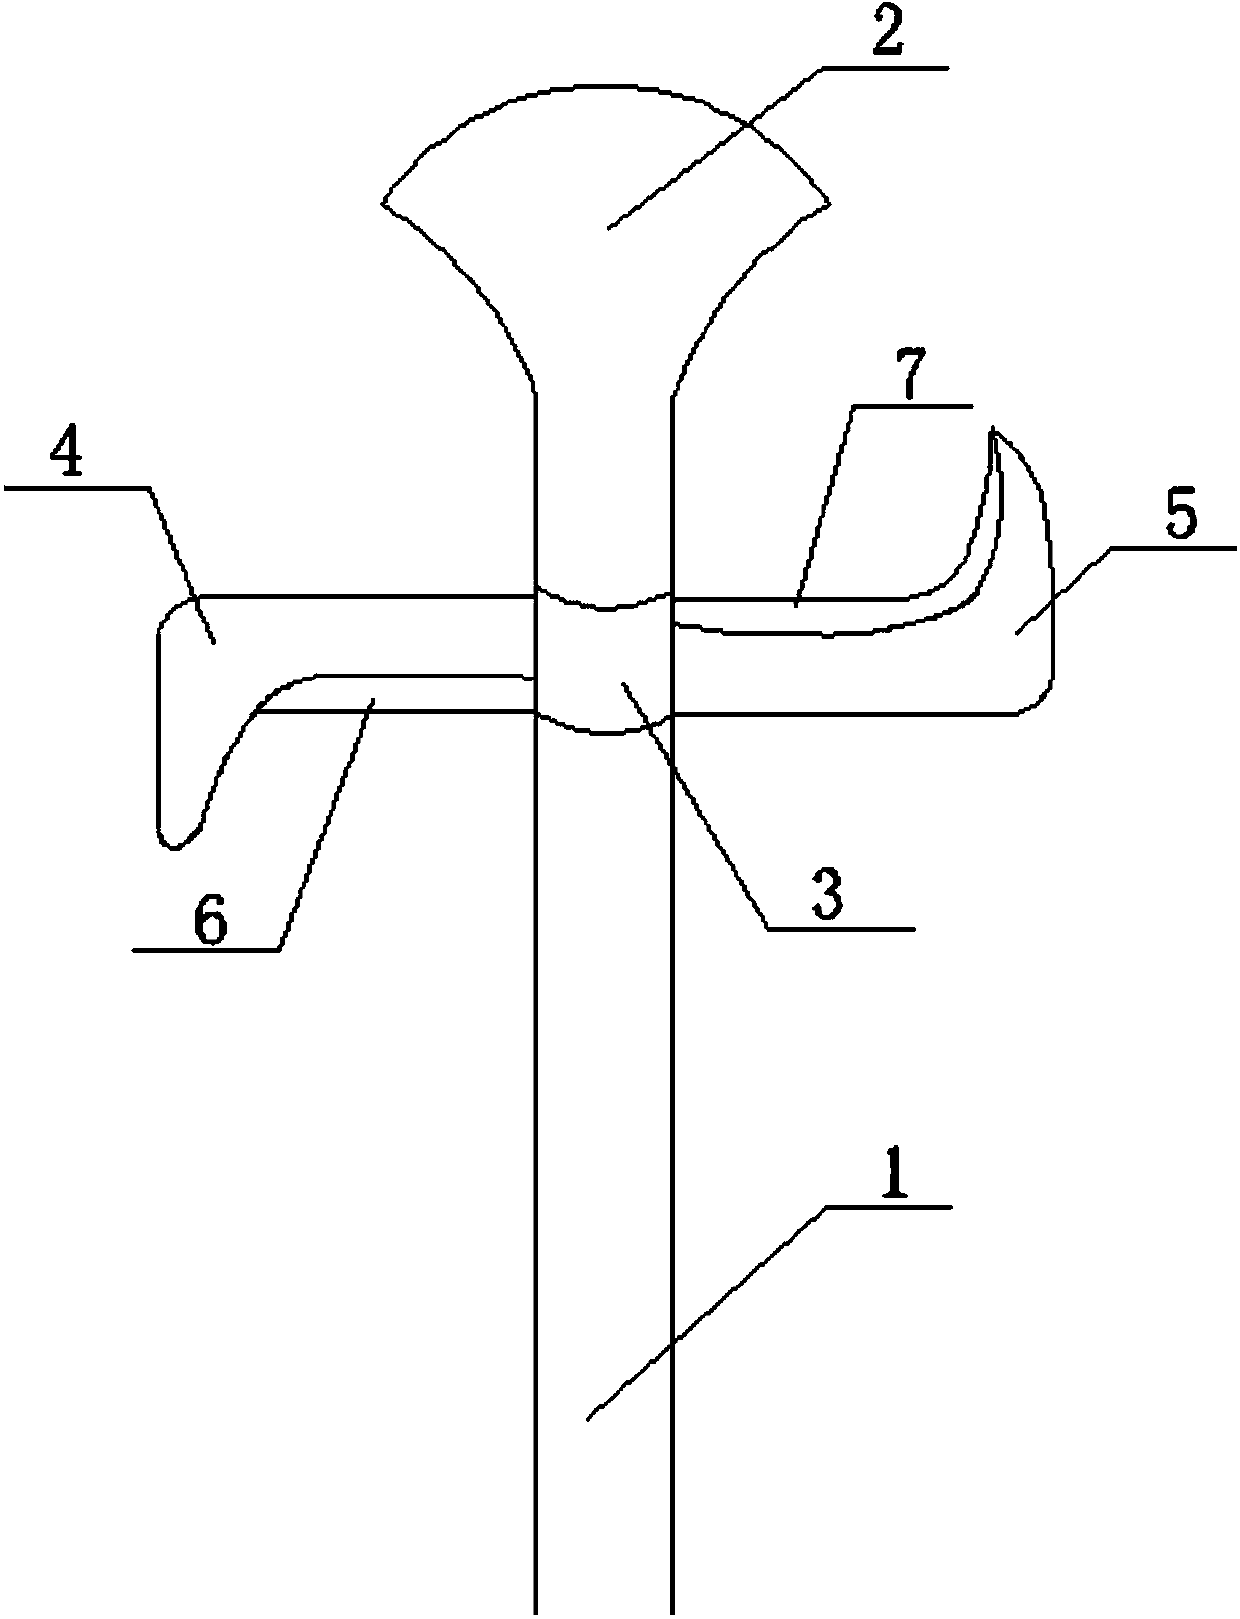 Pruning shovel structure